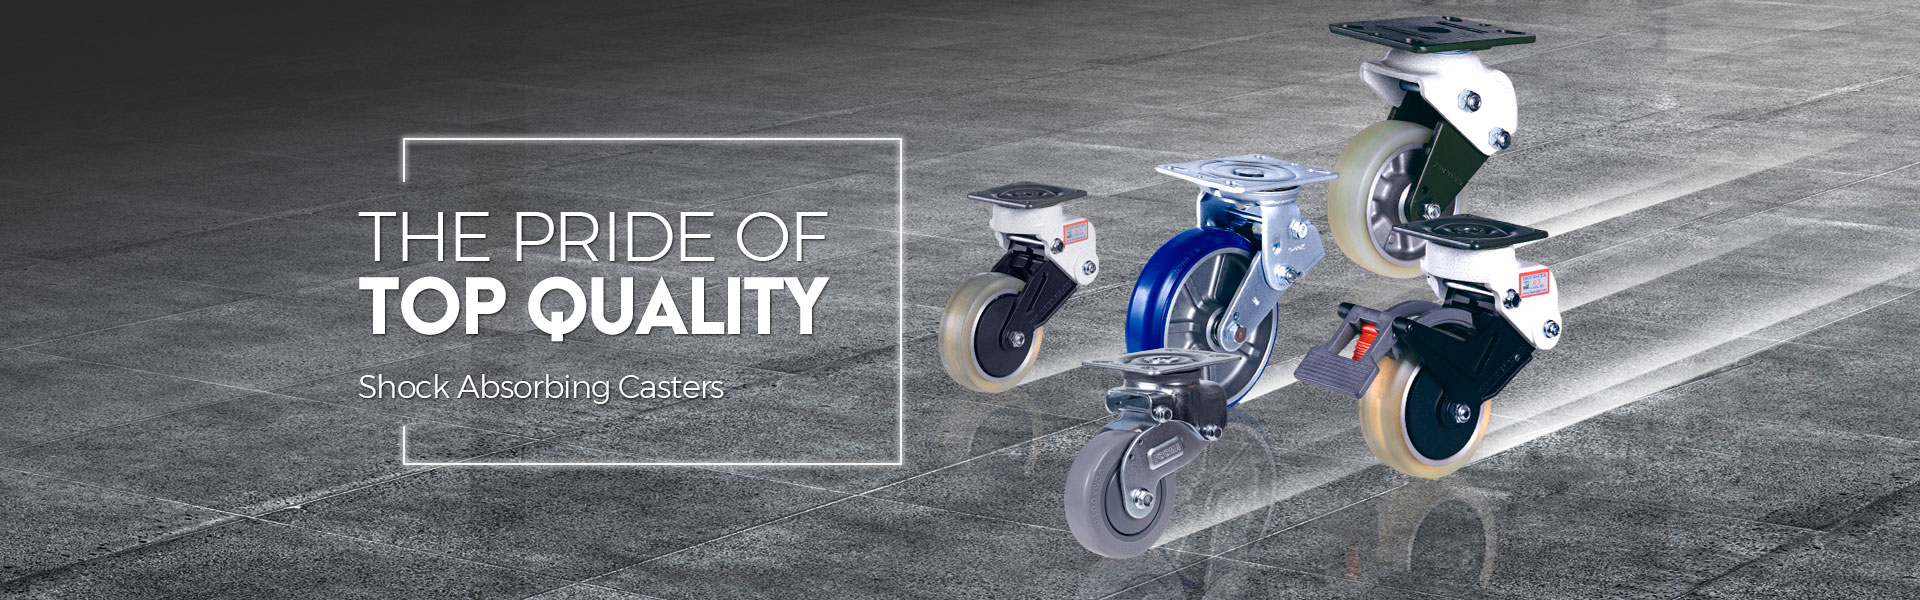 FOOT MASTER Casters, Shock absorbing casters, The pride of Top Quality